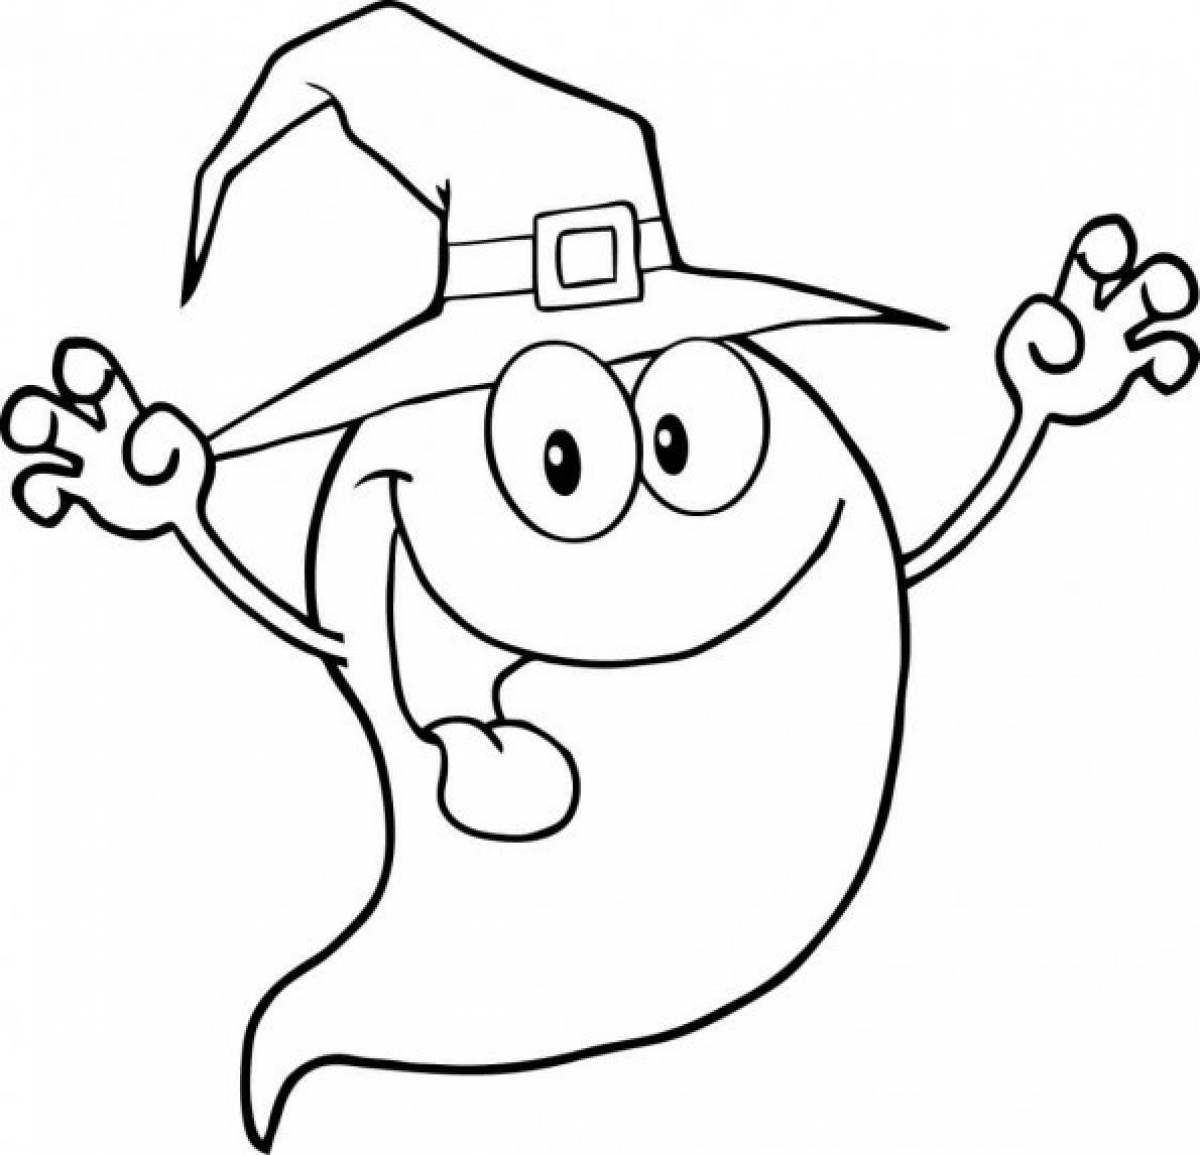 Coloring page ghost in a hat